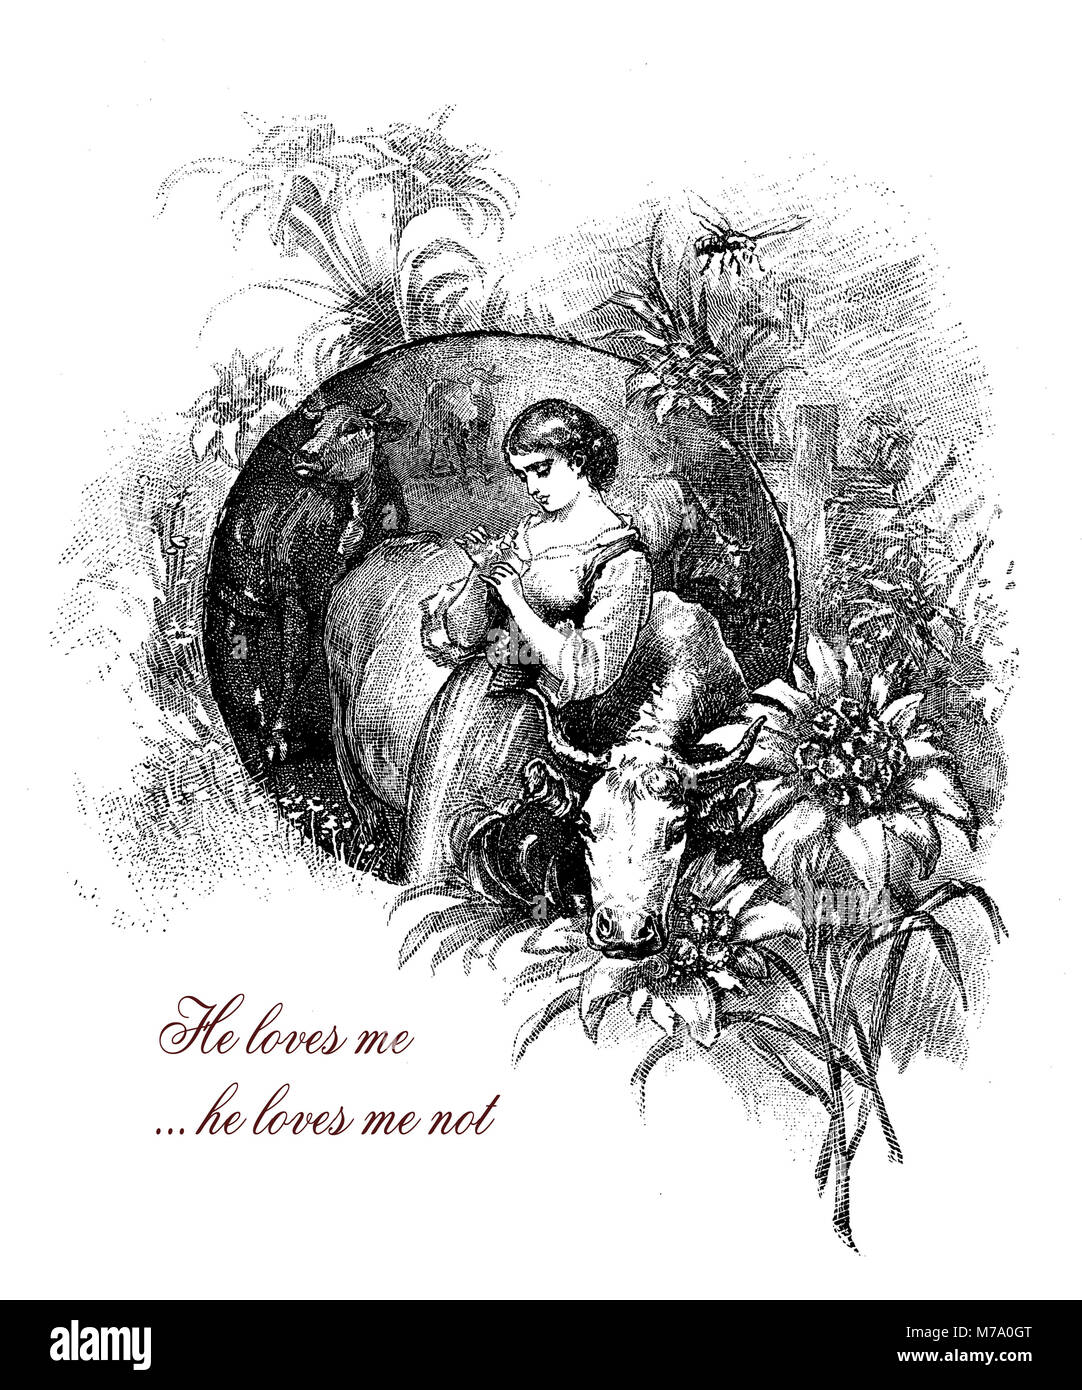 He loves me...he loves me not, girl with edelweiss, romantic vintage engraving Stock Photo